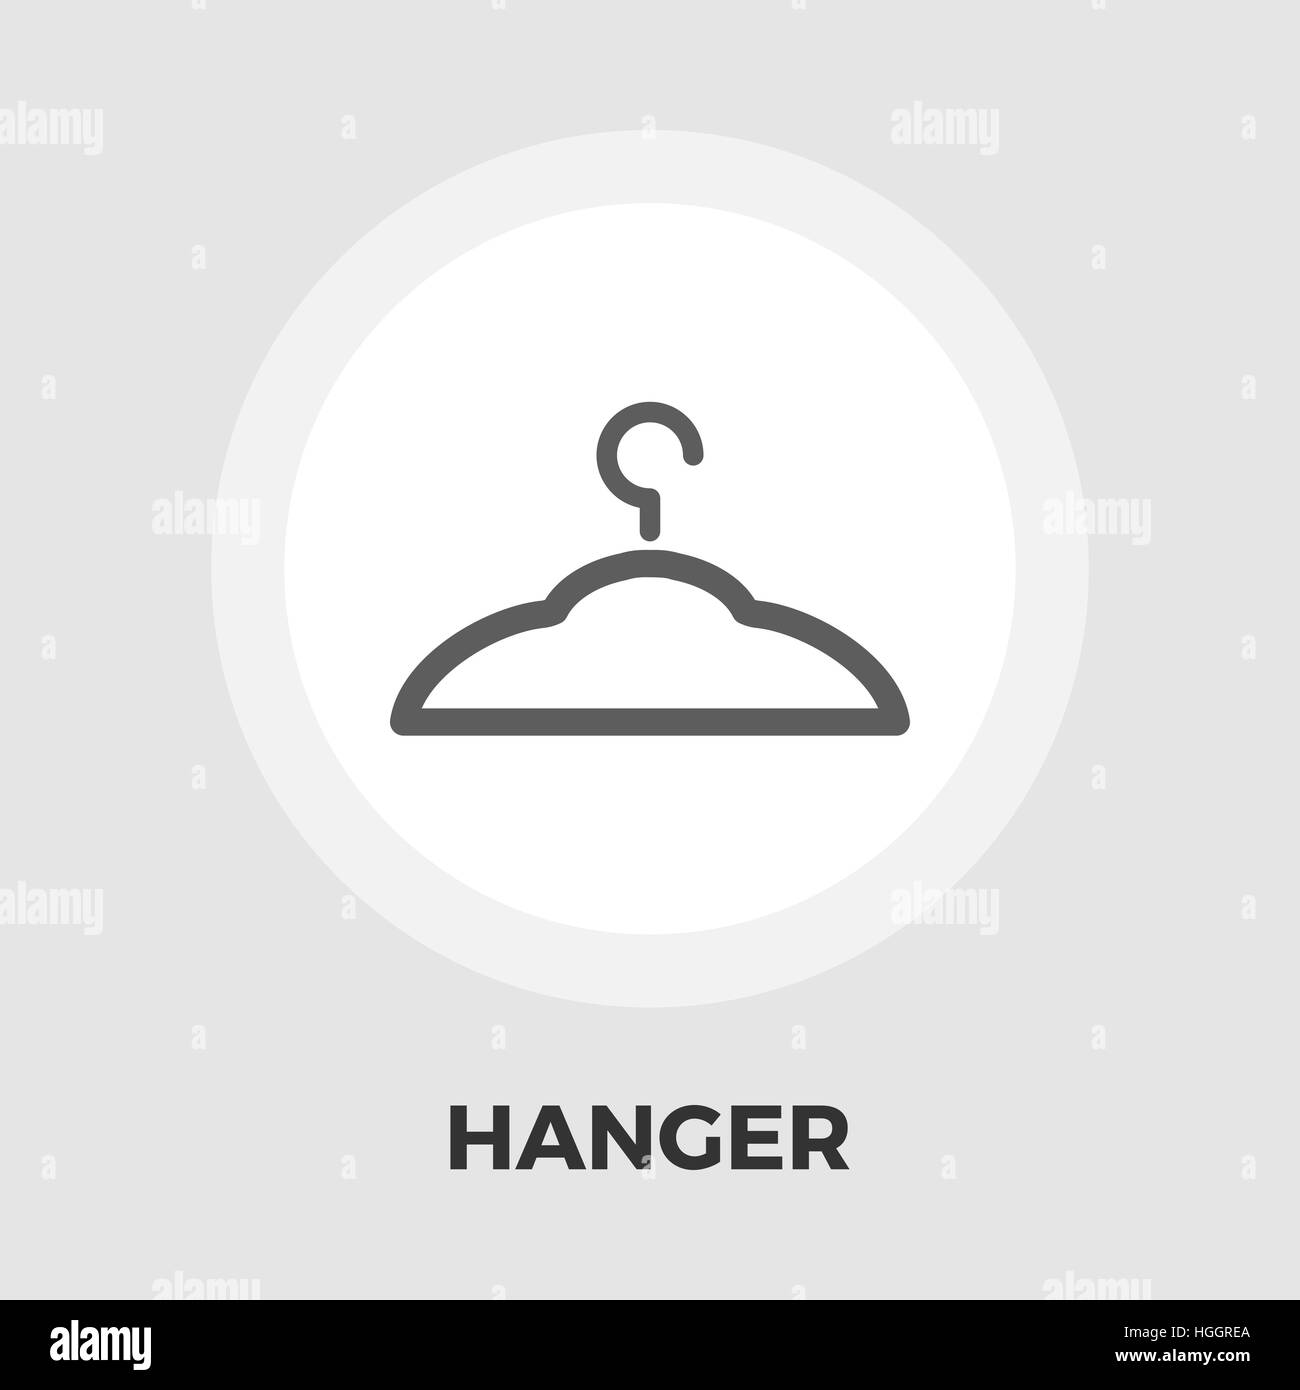 Hanger icon vector. Flat icon isolated on the white background. Editable EPS file. Vector illustration. Stock Vector